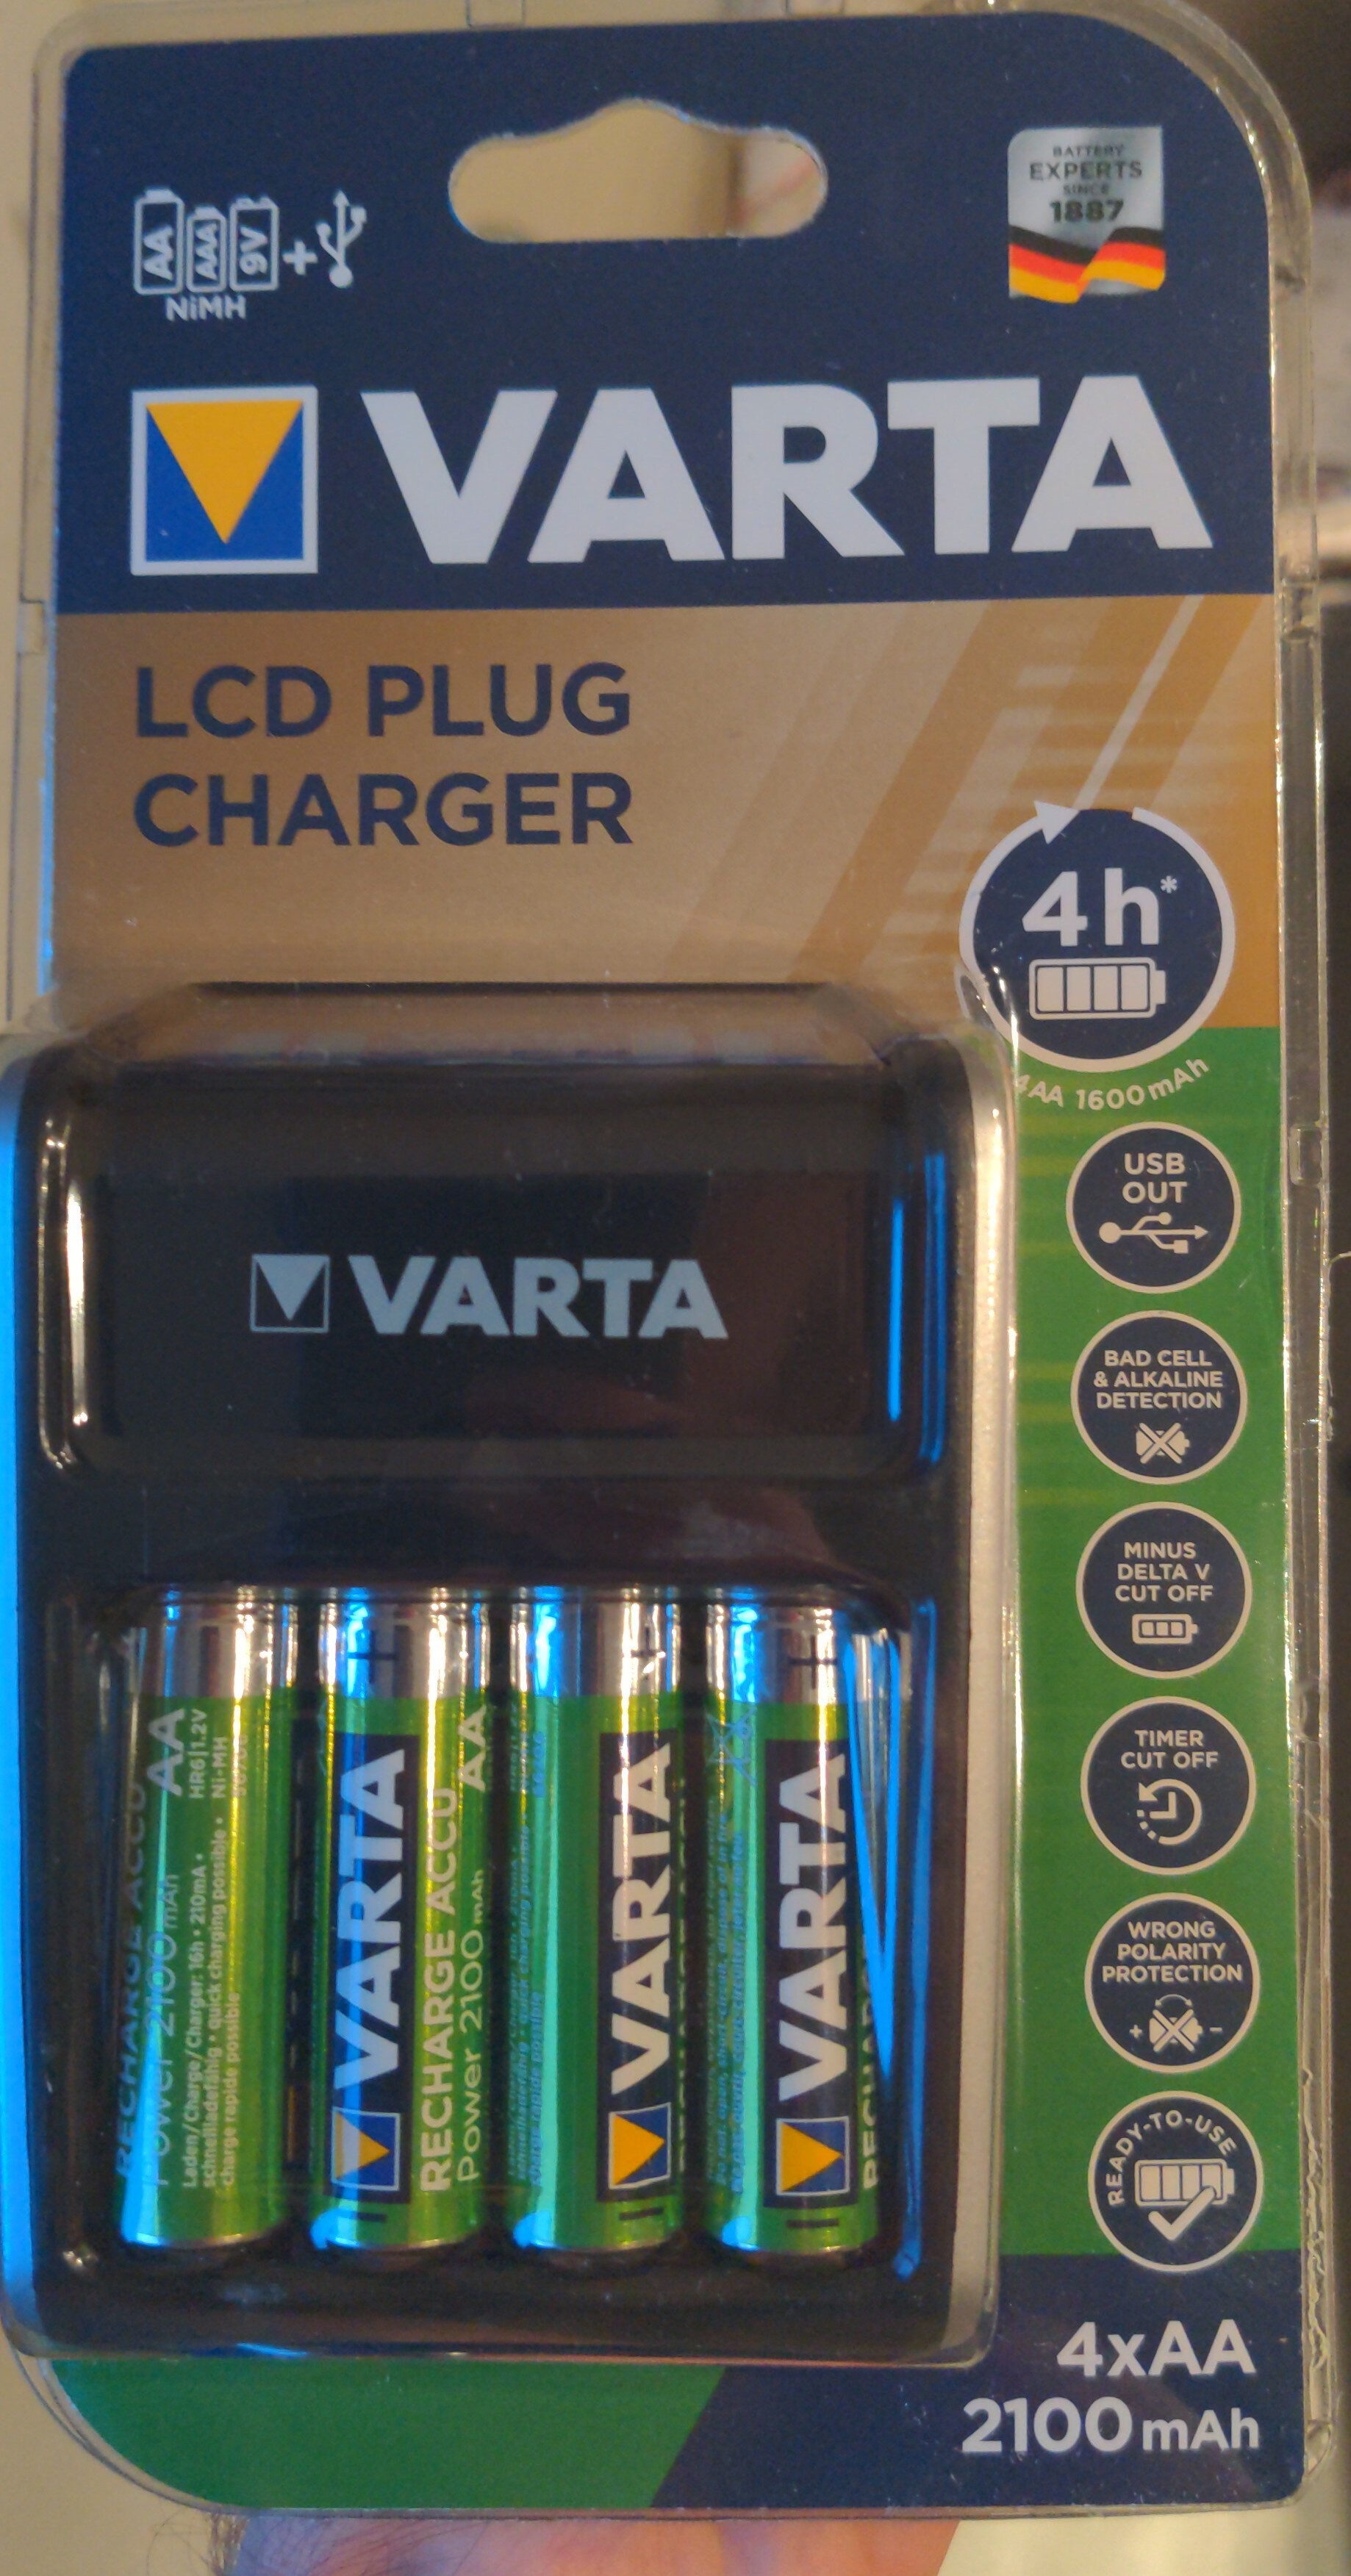 LCD plug charger - Product - en